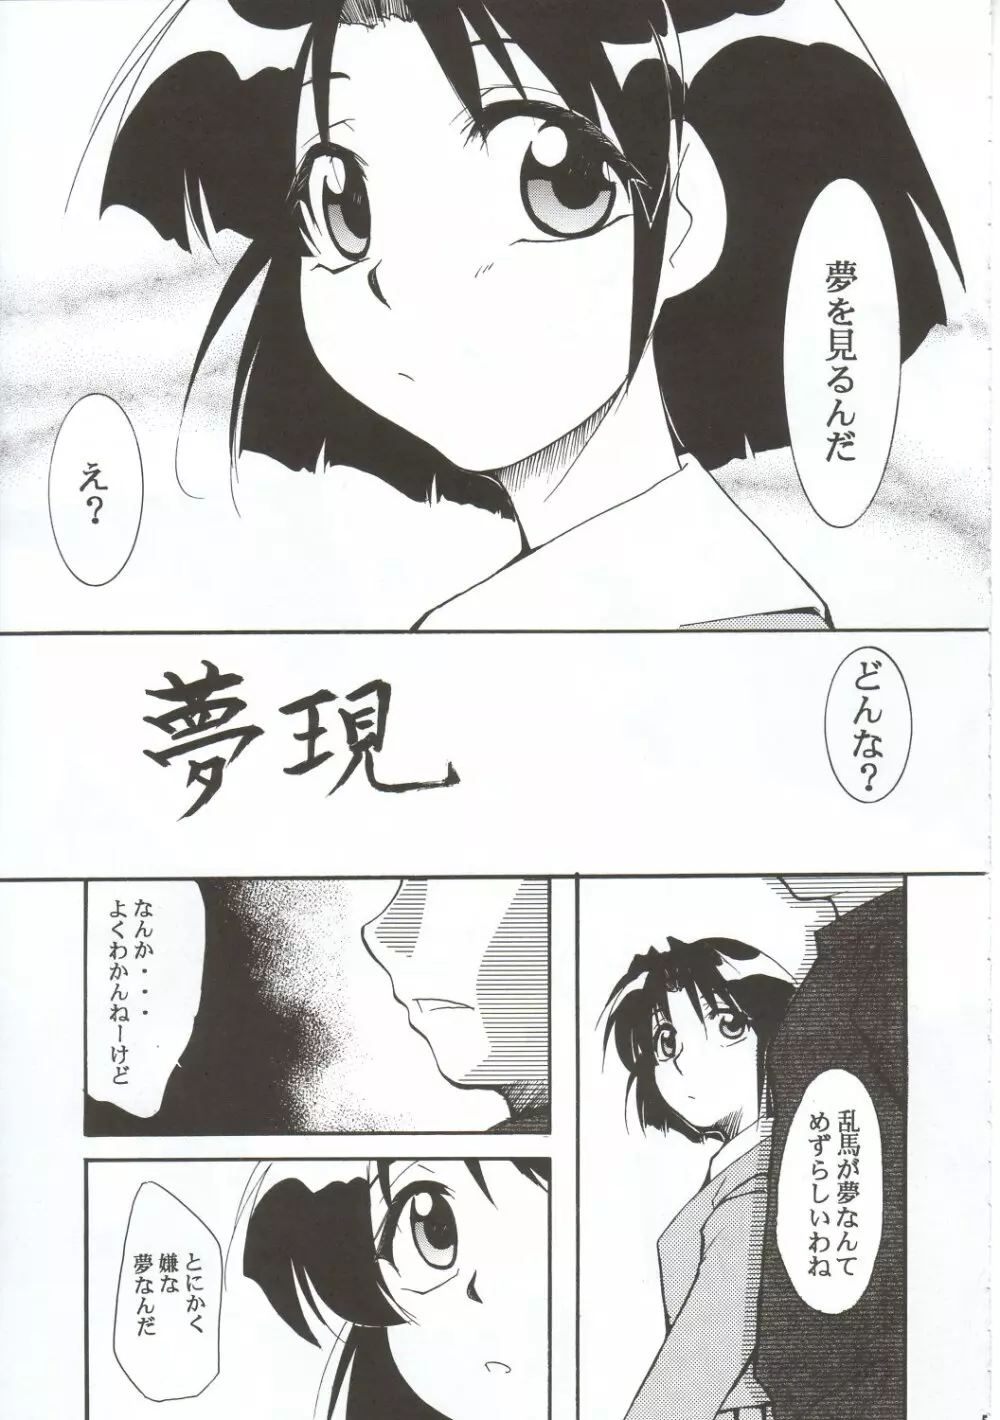 RANMA1/2 WORKS 3 Page.4